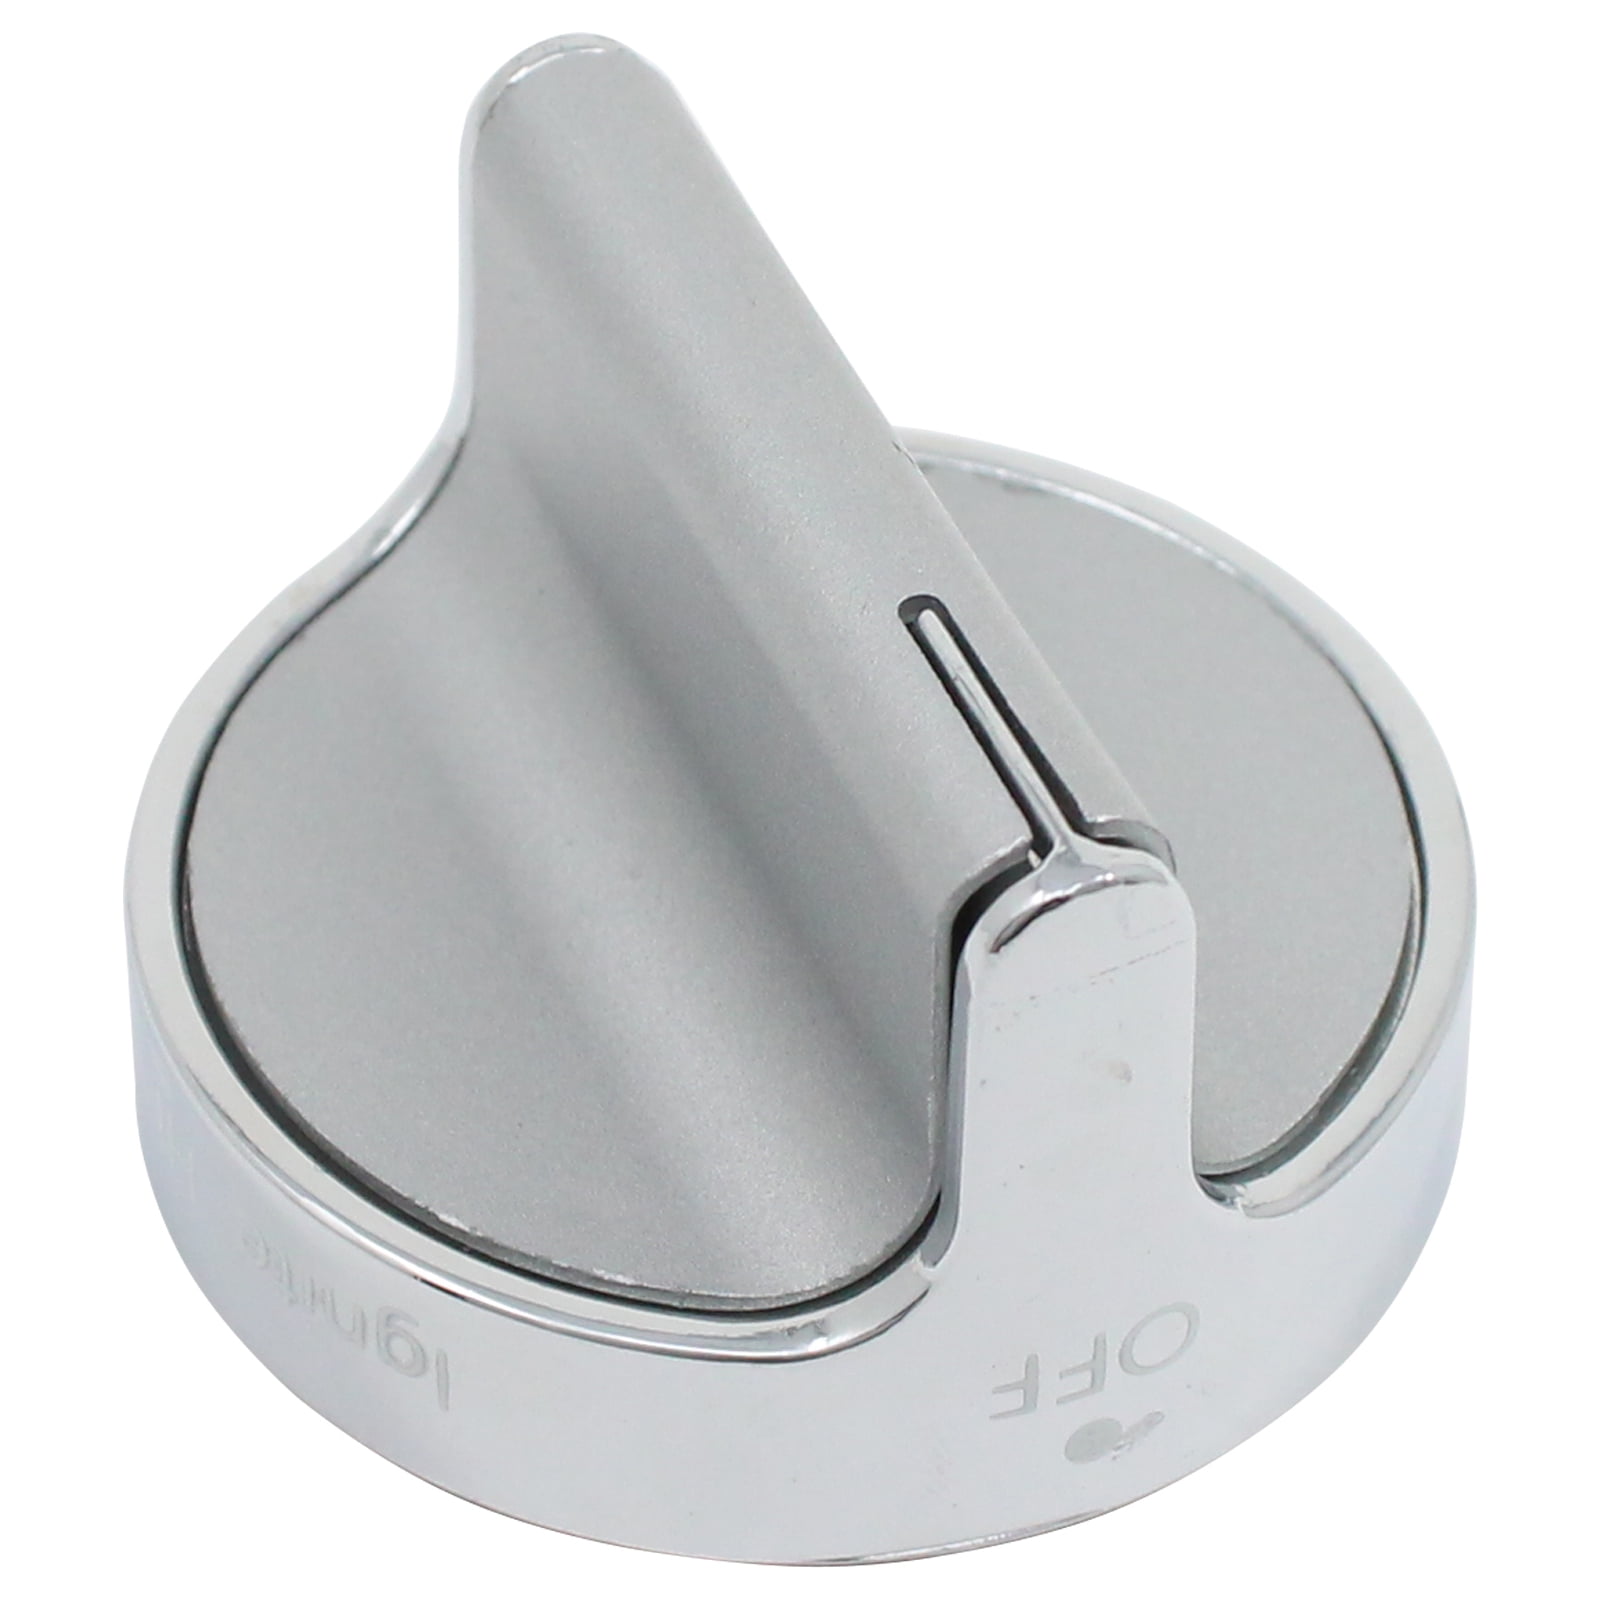 Details about   W10594481 Stainless Steel Stove Control/Oven Range Burner Knobs,Fits Whirlpool 